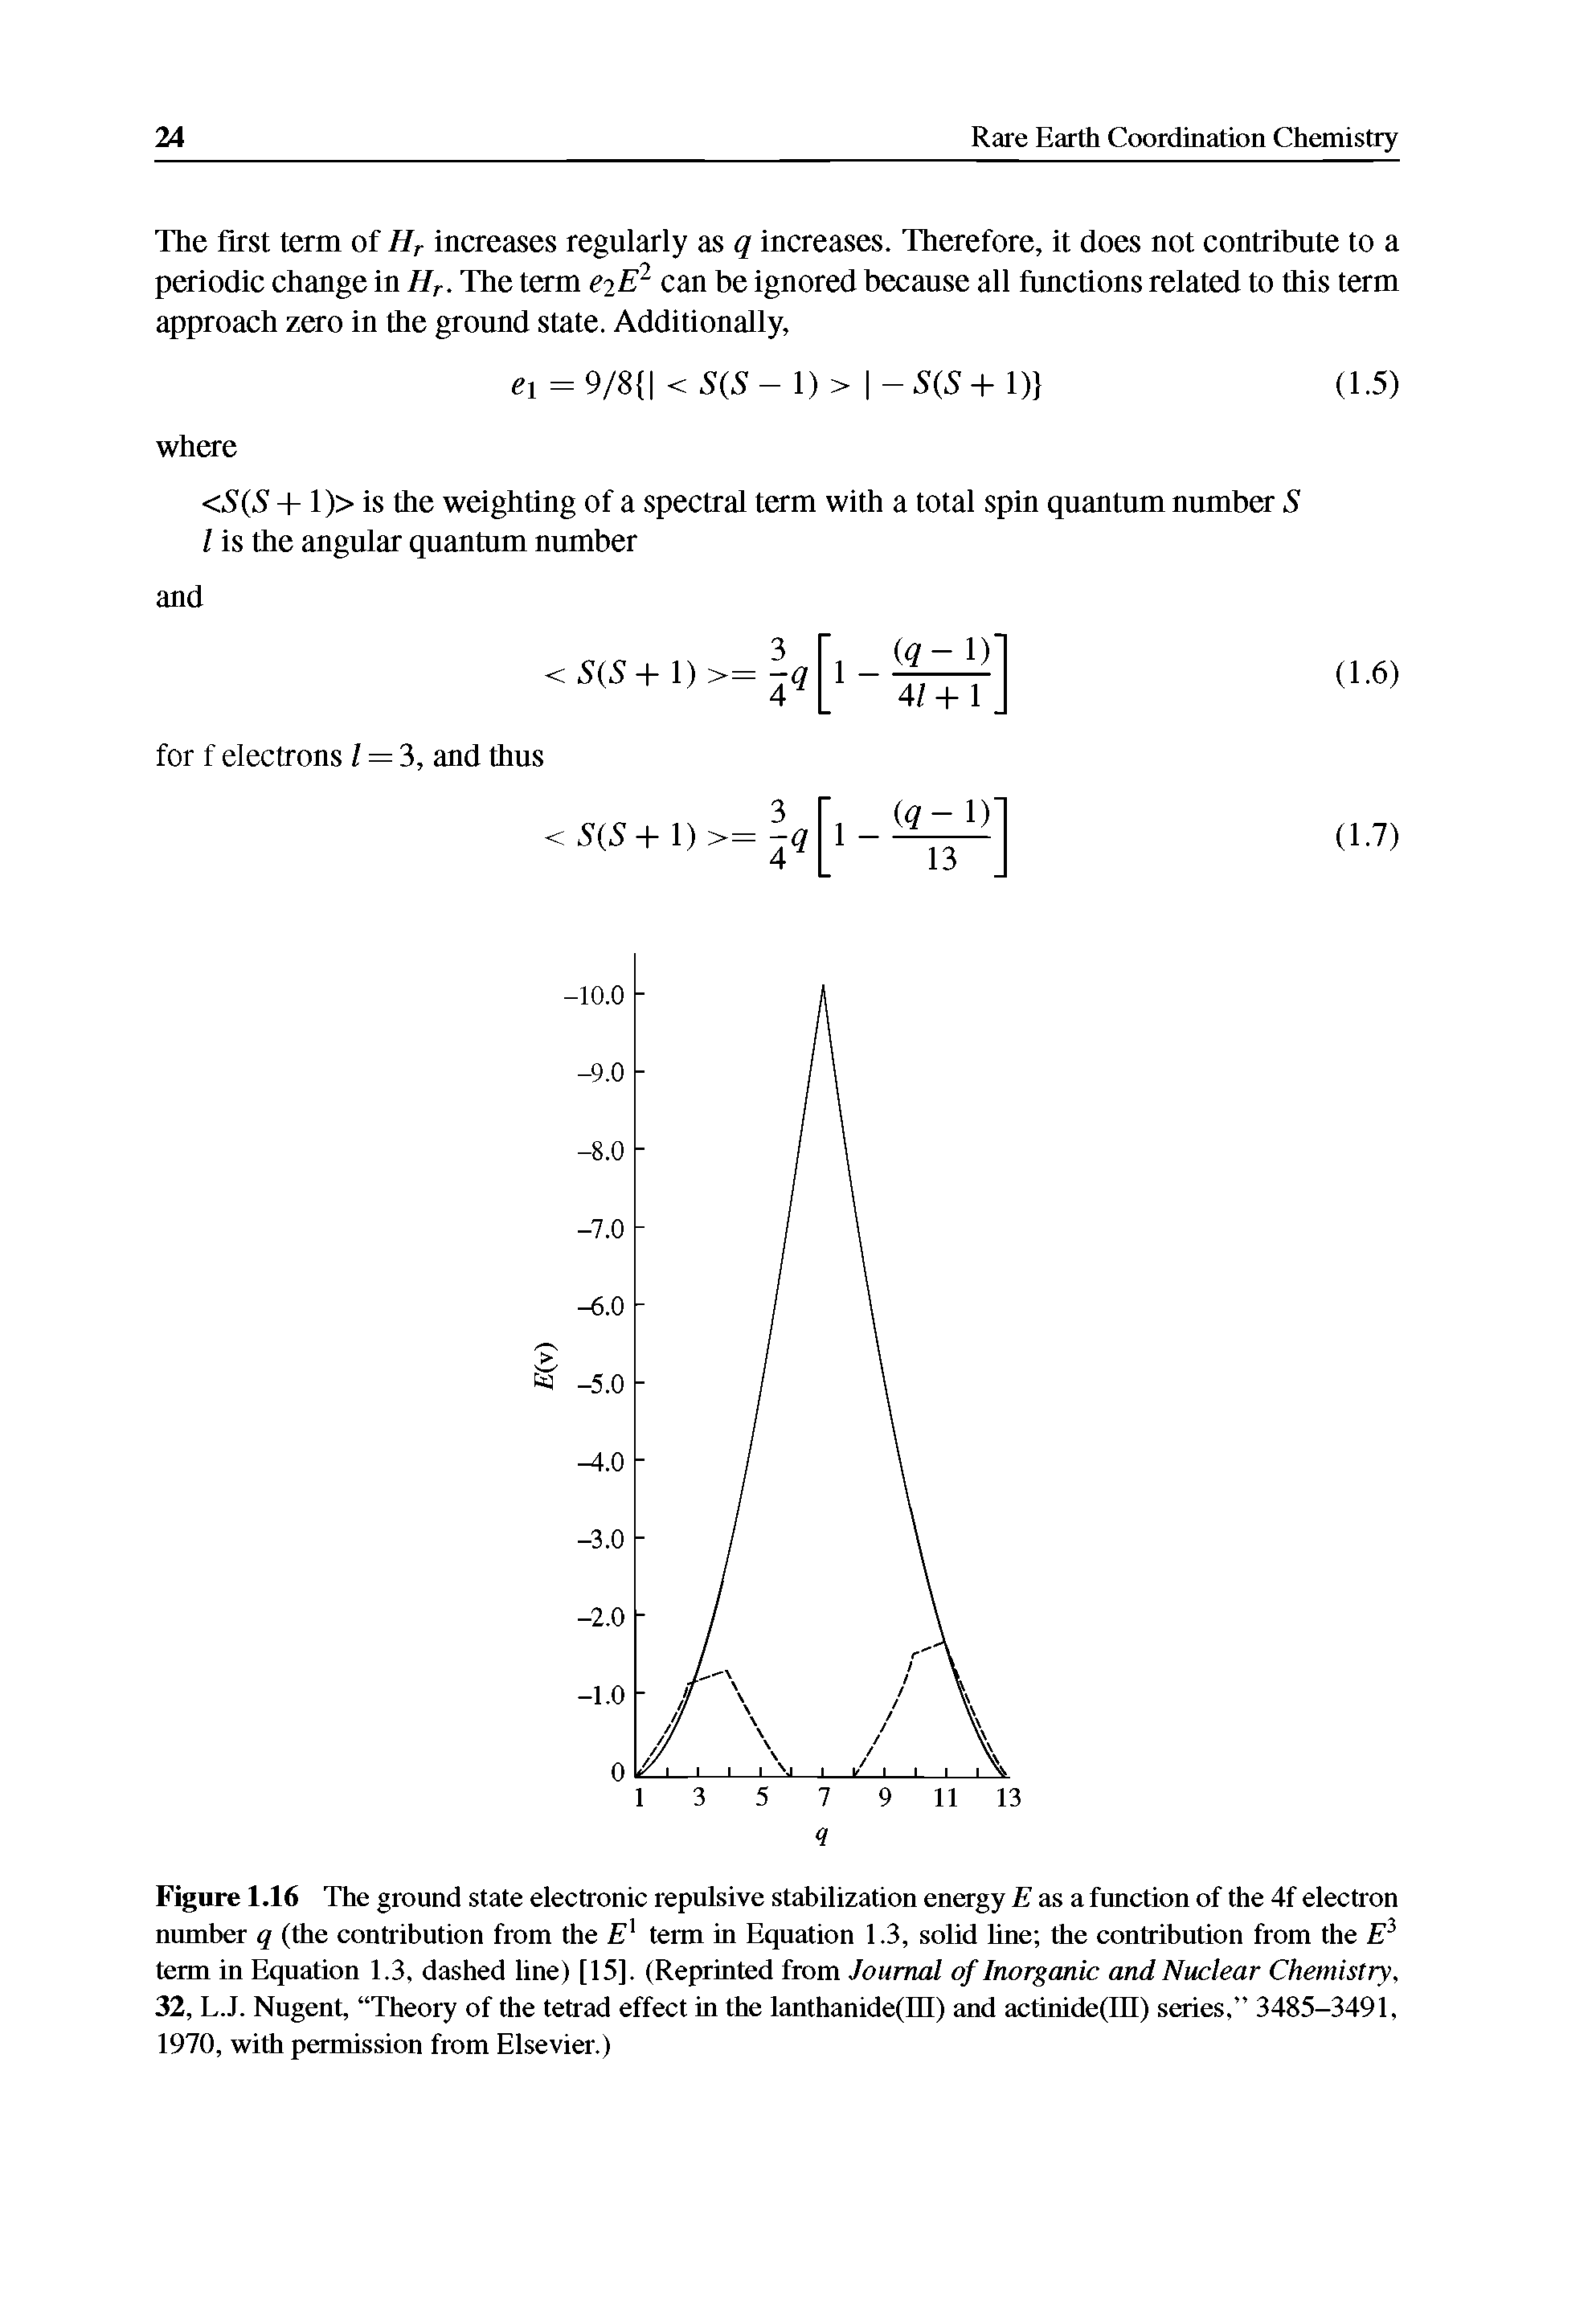 Figure 1.16 The ground state electronic repnlsive stahilization energy 1 as a fnnction of the 4f electron nnmher q (the contribution from the F term in Eqnation 1.3, solid hne the contribntion from the term in Eqnation 1.3, dashed line) [15]. (Reprinted from Journal of Inorganic and Nuclear Chemistry, 32, L.J. Nngent, Theory of the tetrad effect in the lanthanide(lll) and actinide(lll) series, 3485-3491, 1970, with permission from Elsevier.)...